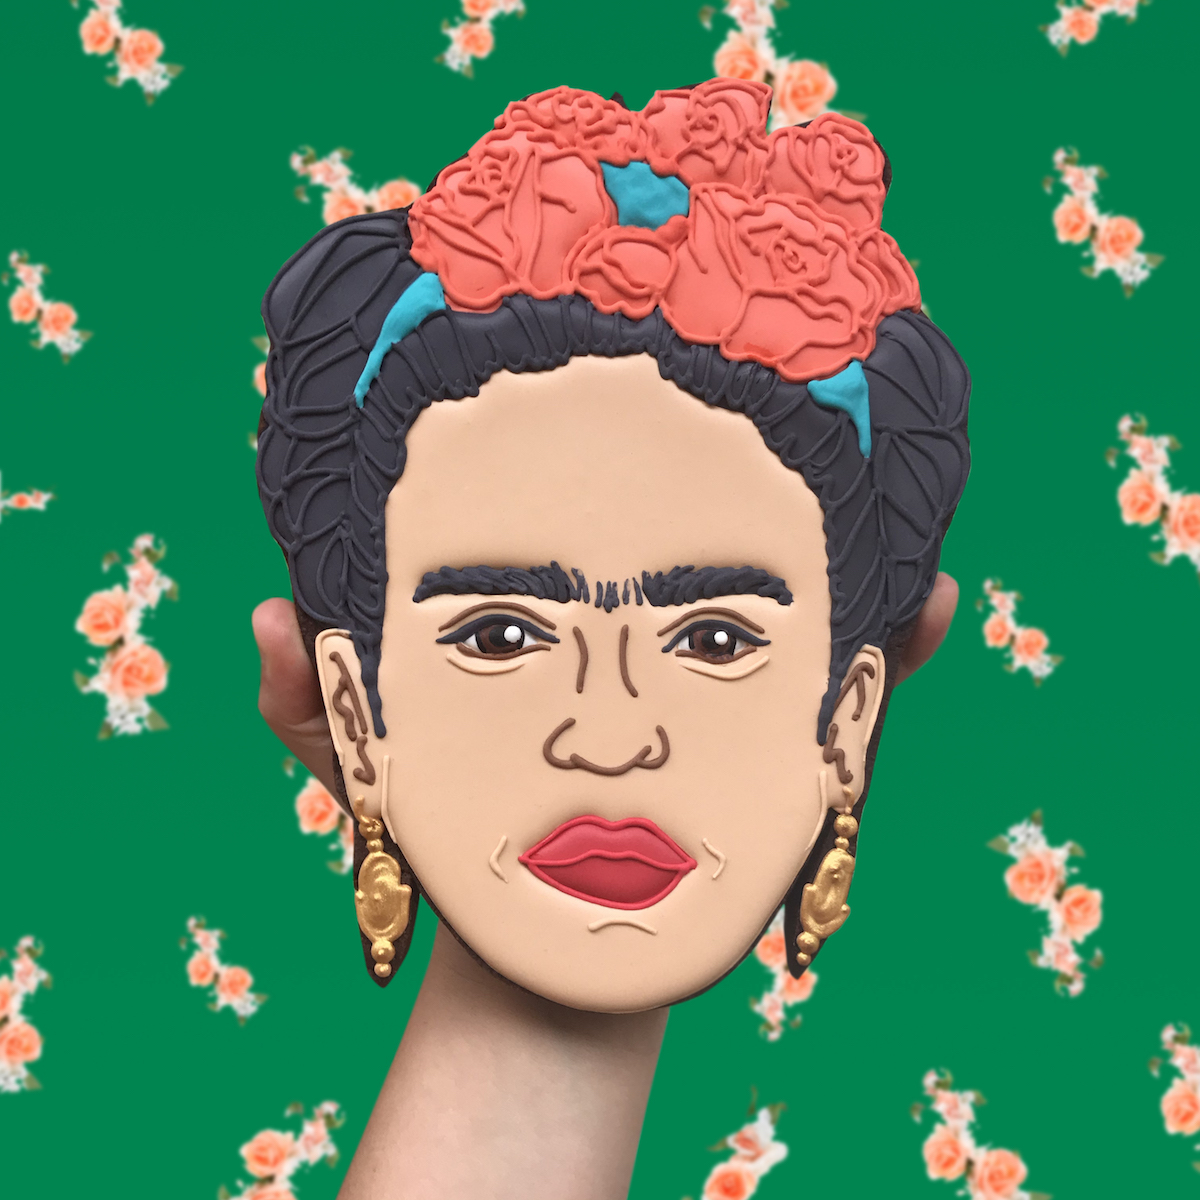 Frida Kahlo by The Confectionist.